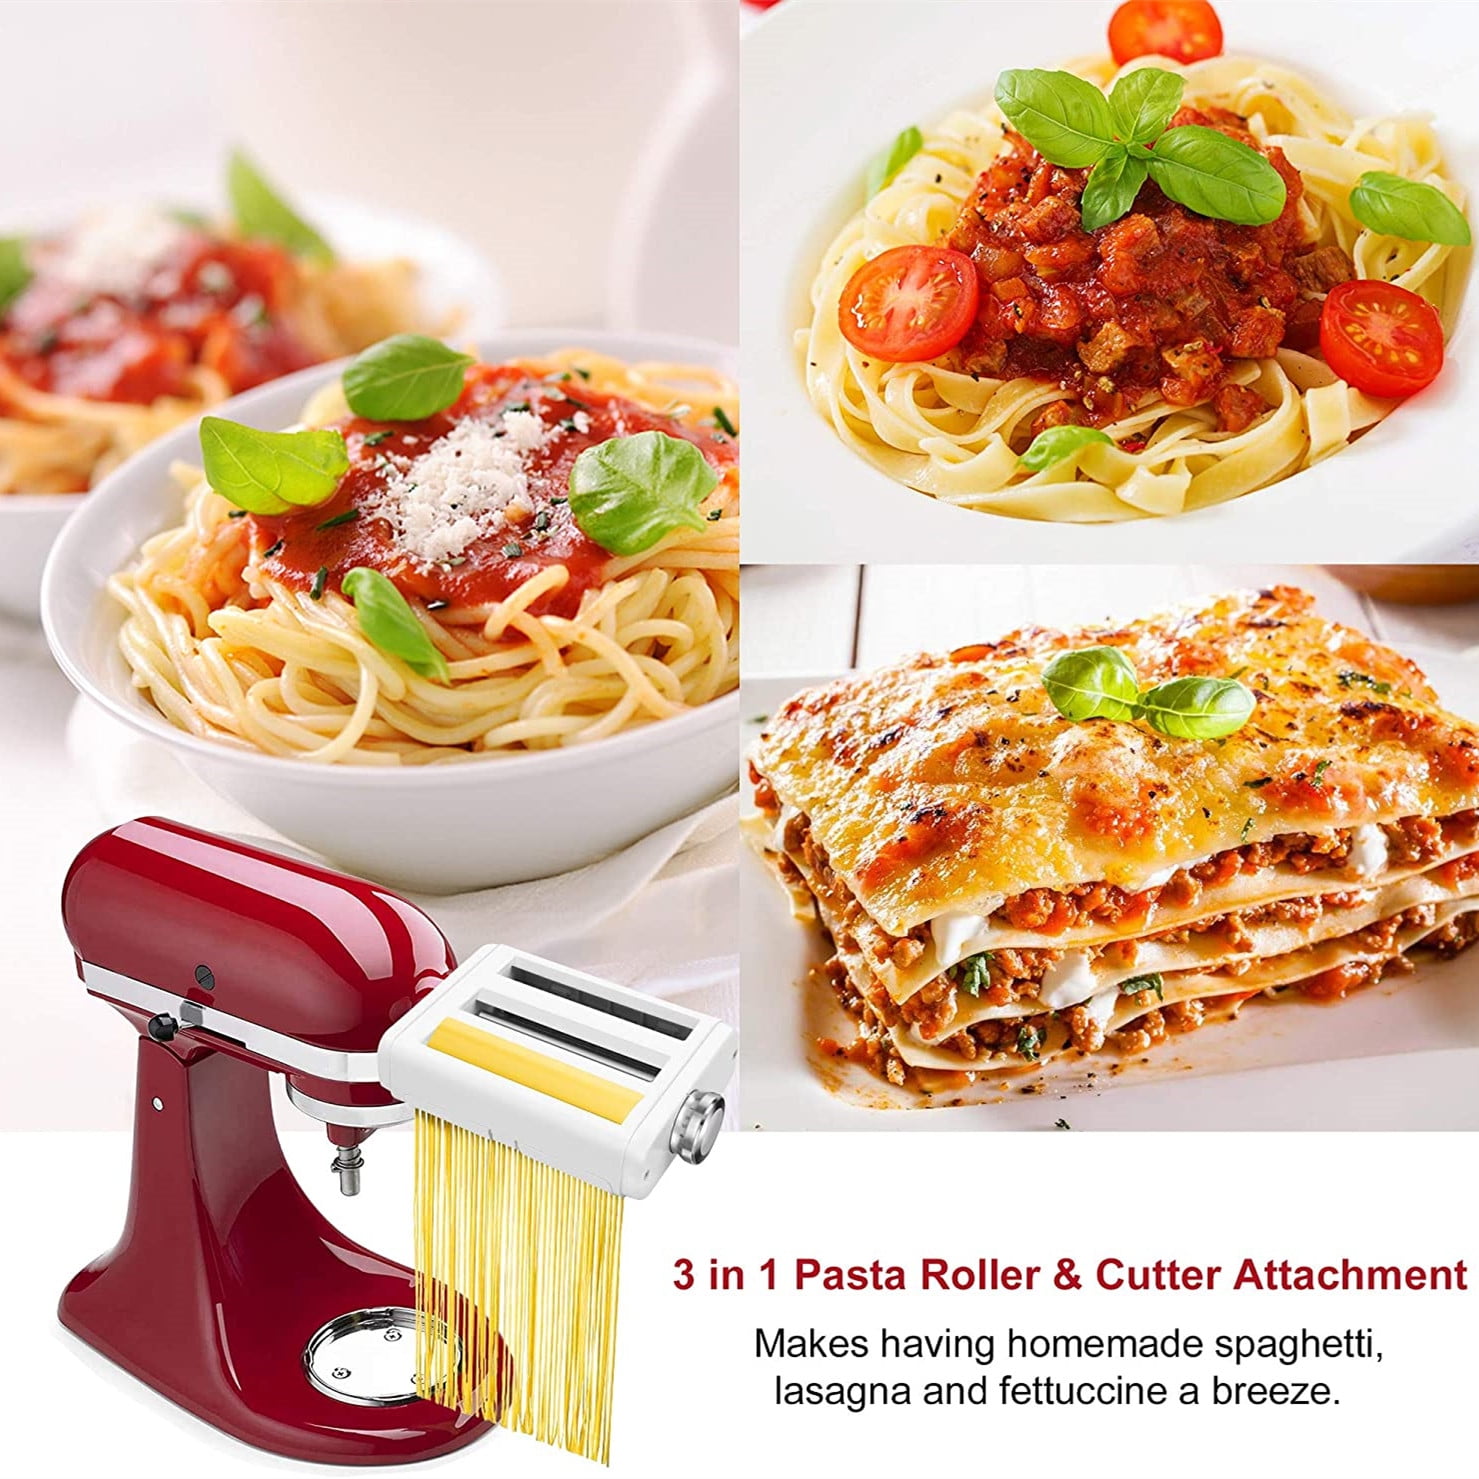 KitchenAid Pasta Roller - Spoons N Spice